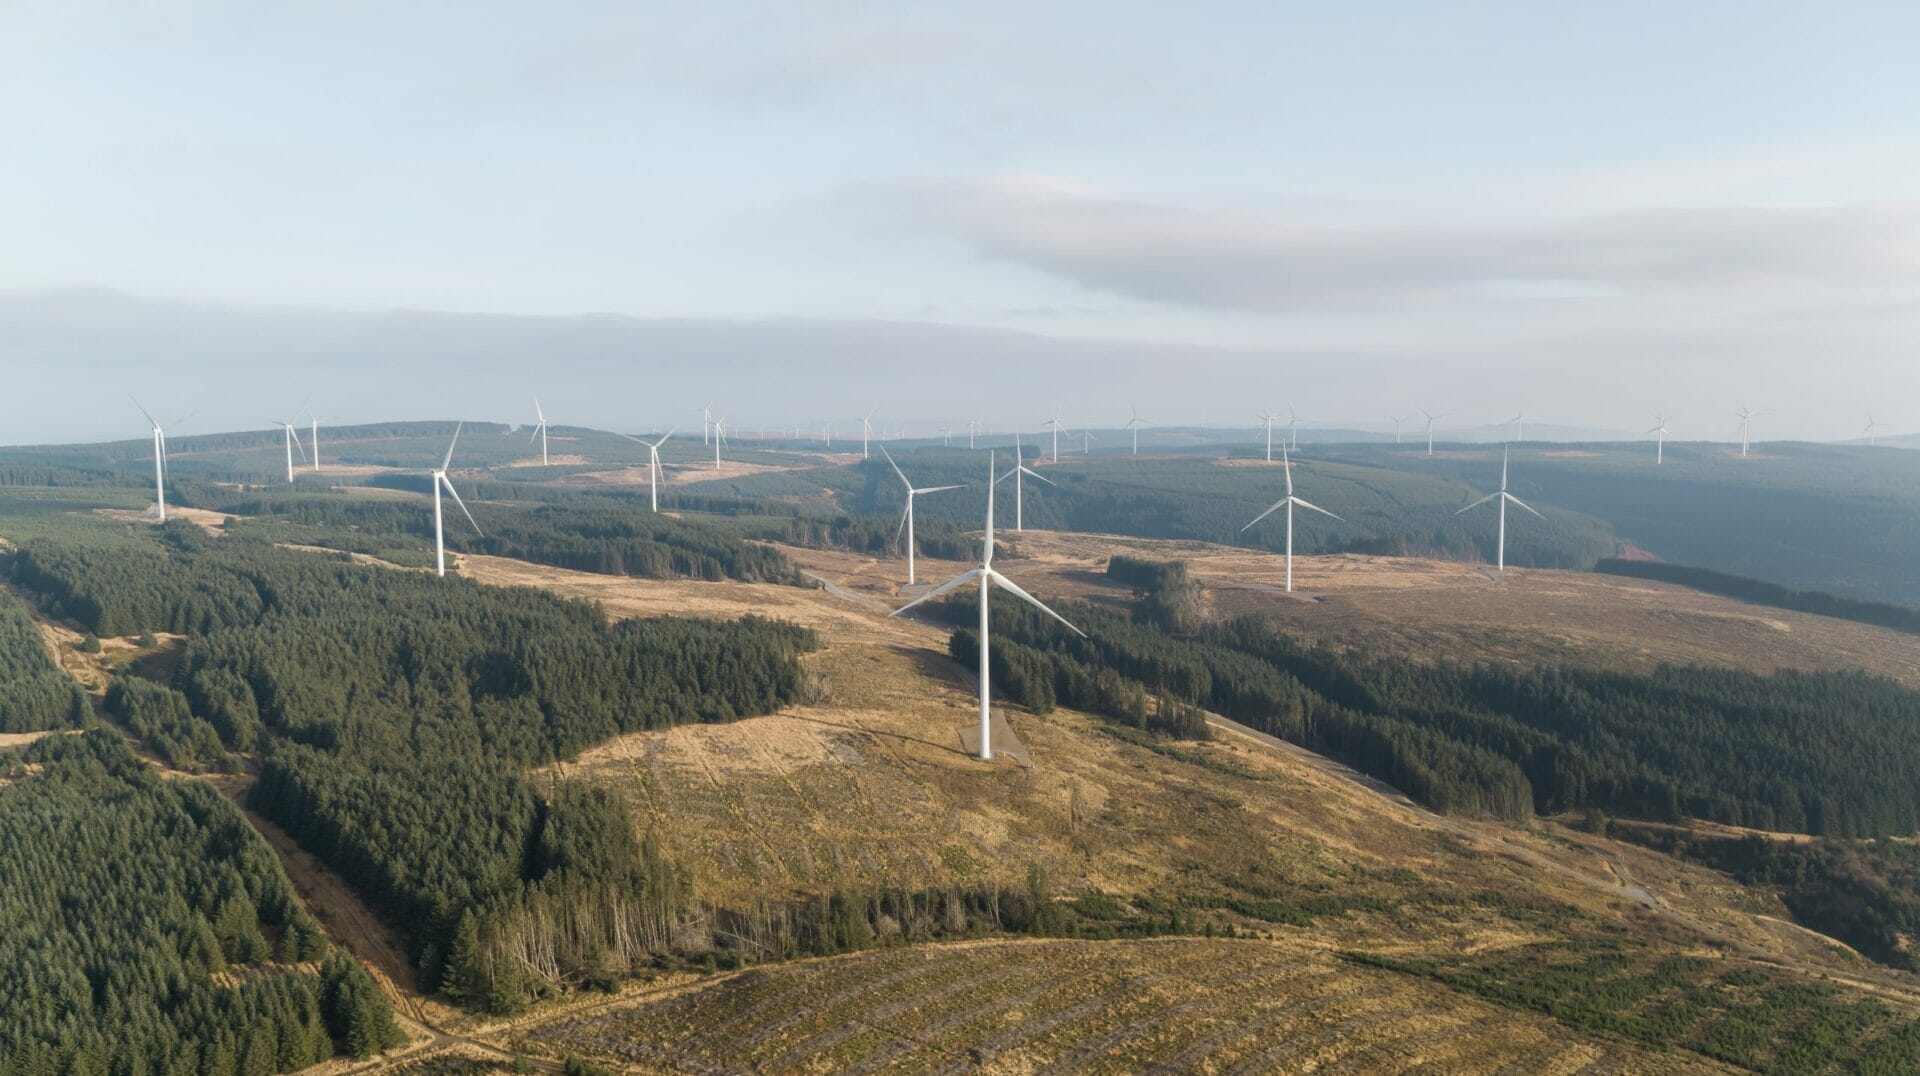 Scottish firm awarded £67 million contract to construct South Kyle Wind Farm @VattenfallUK